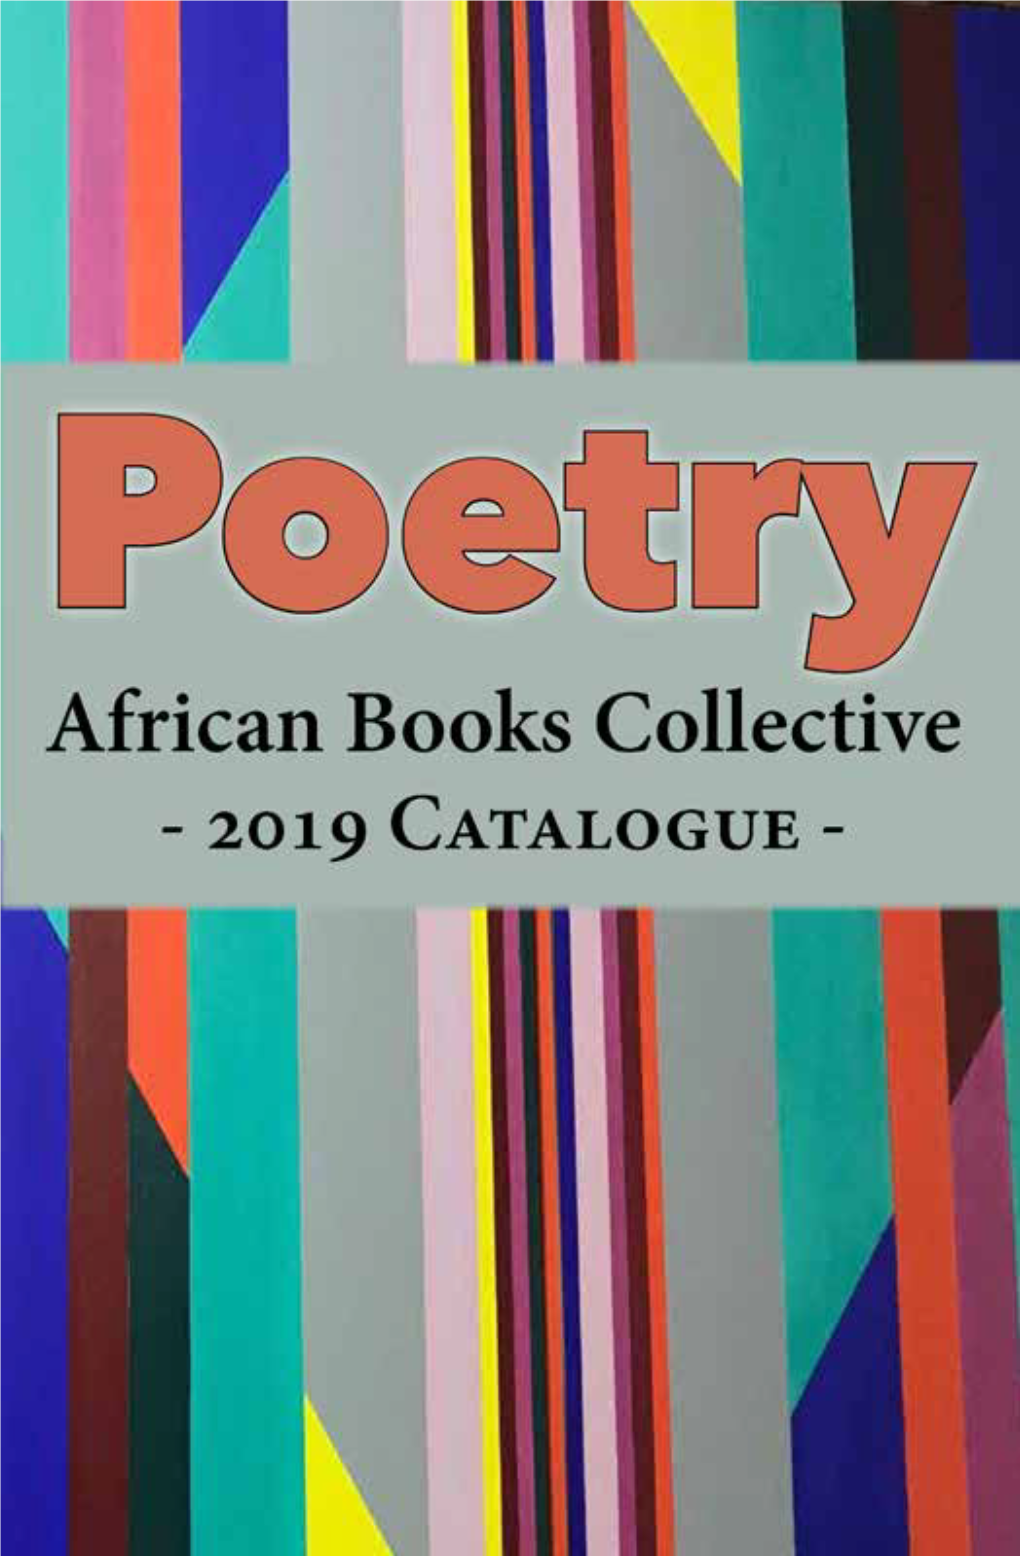 Welcome to the African Books Collective Poetry Catalogue 2019